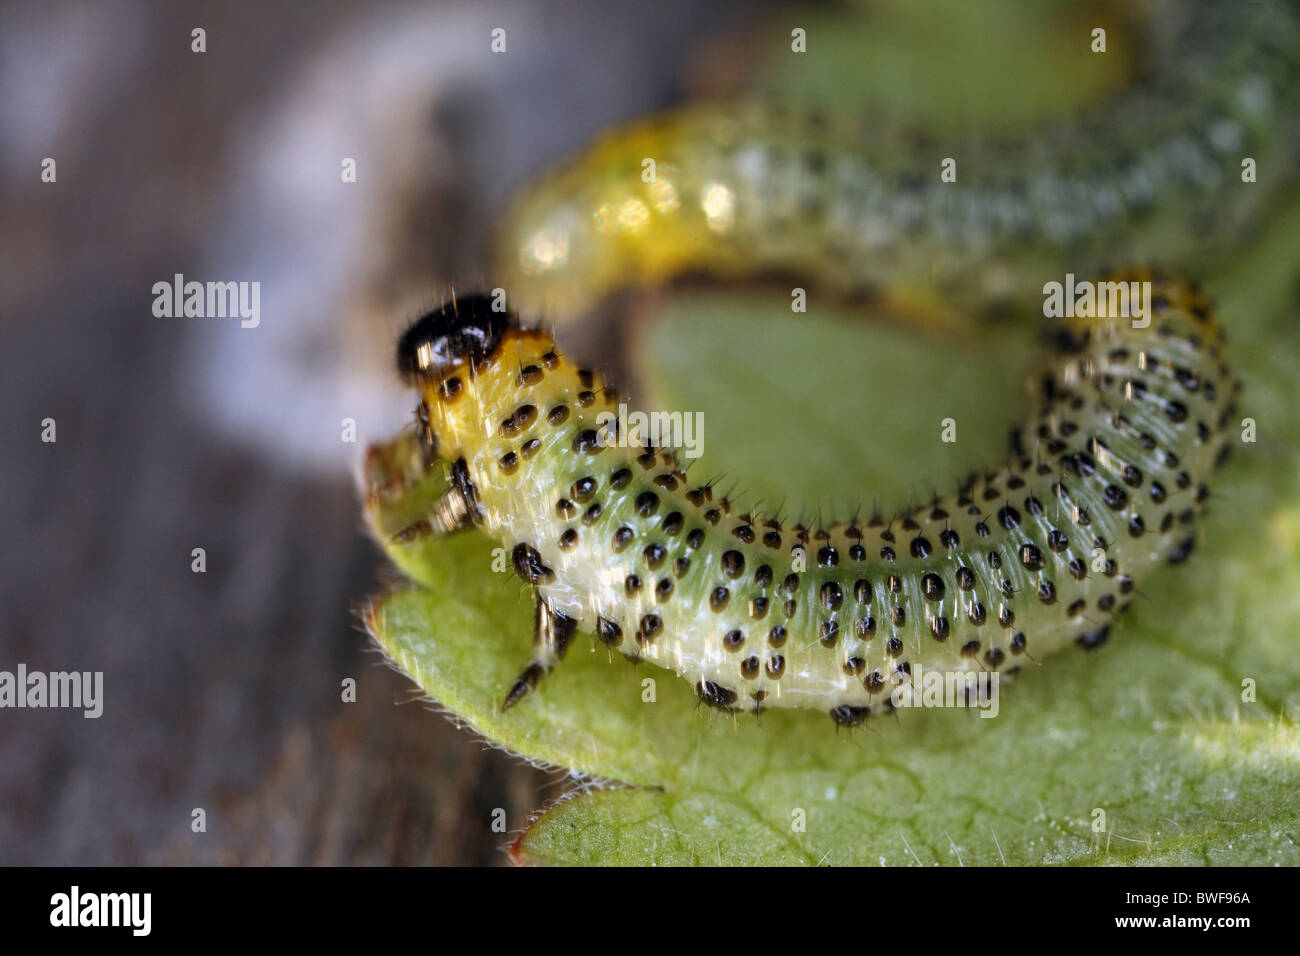 Caterpillars chewing on a leaf Stock Photo